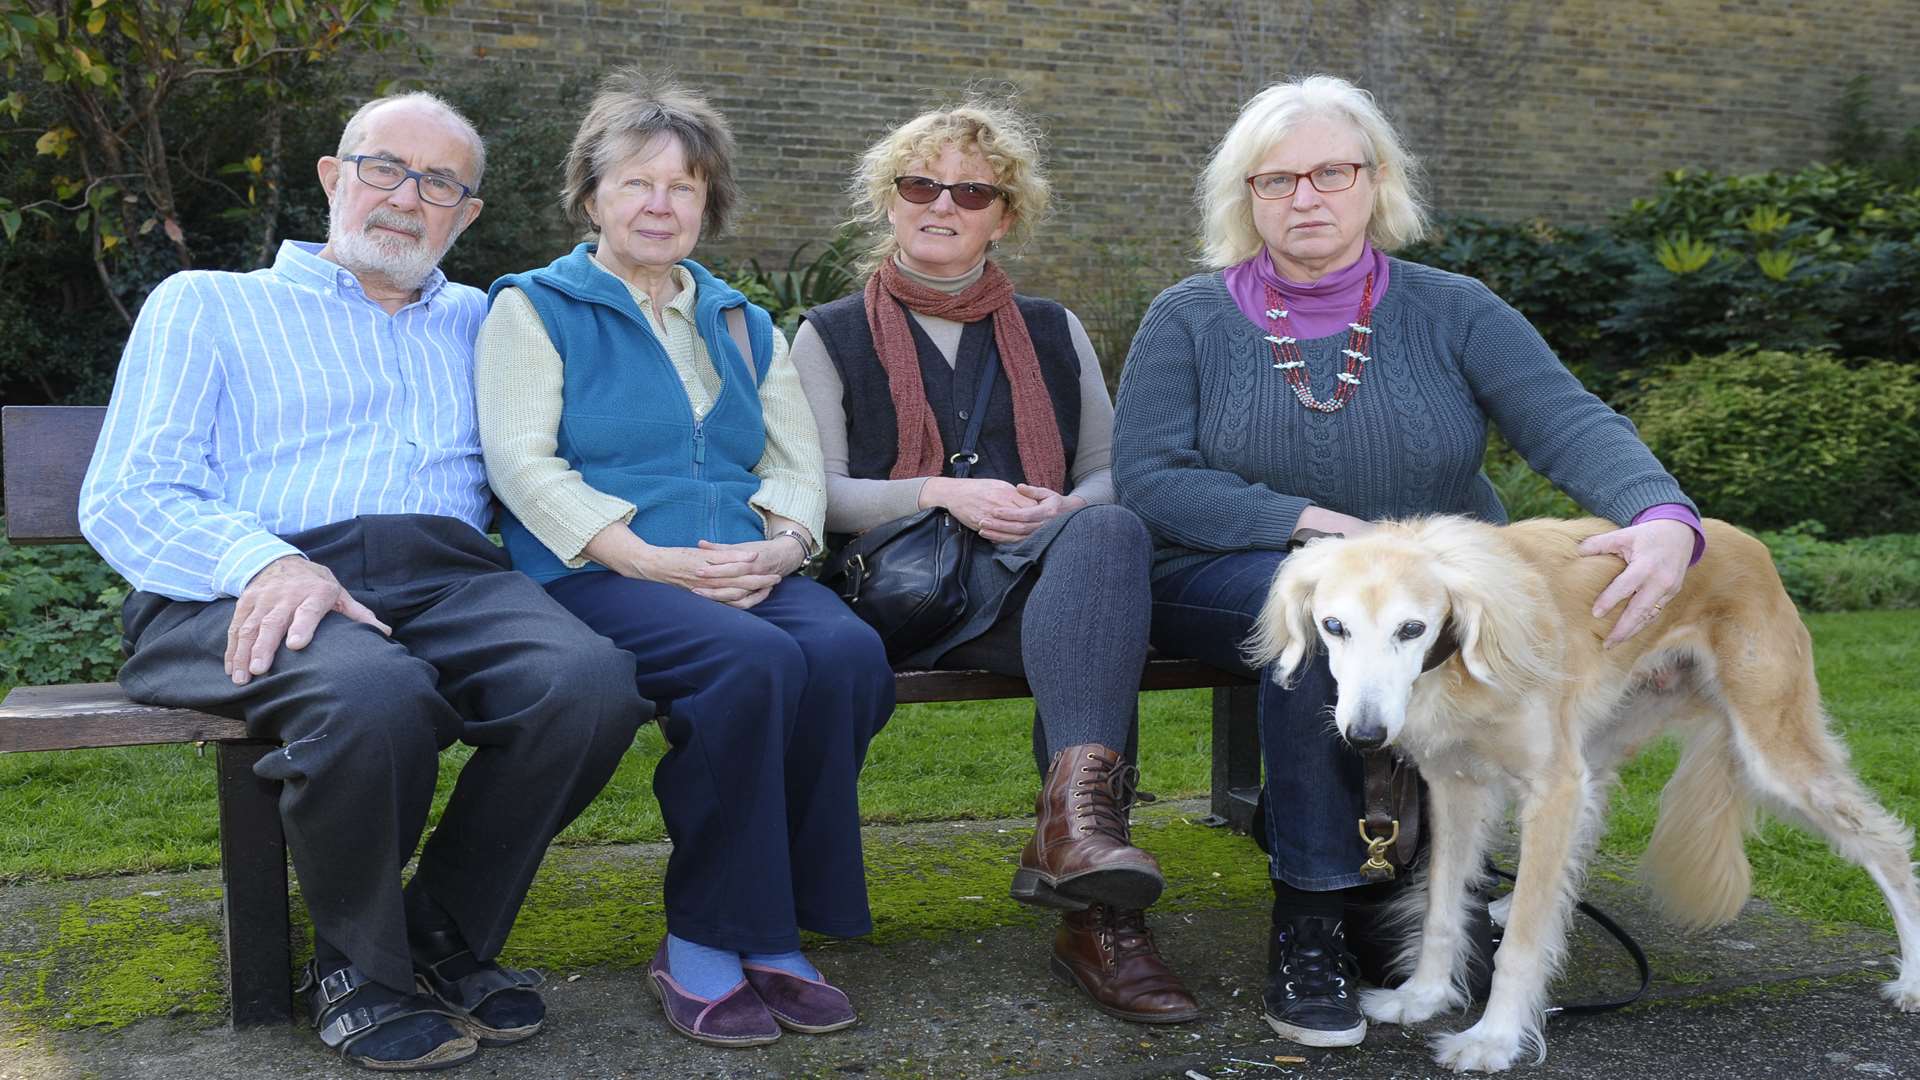 Brian Head, Dot Percival, Ros Young and Alexandra Campbell with her dog Benji.